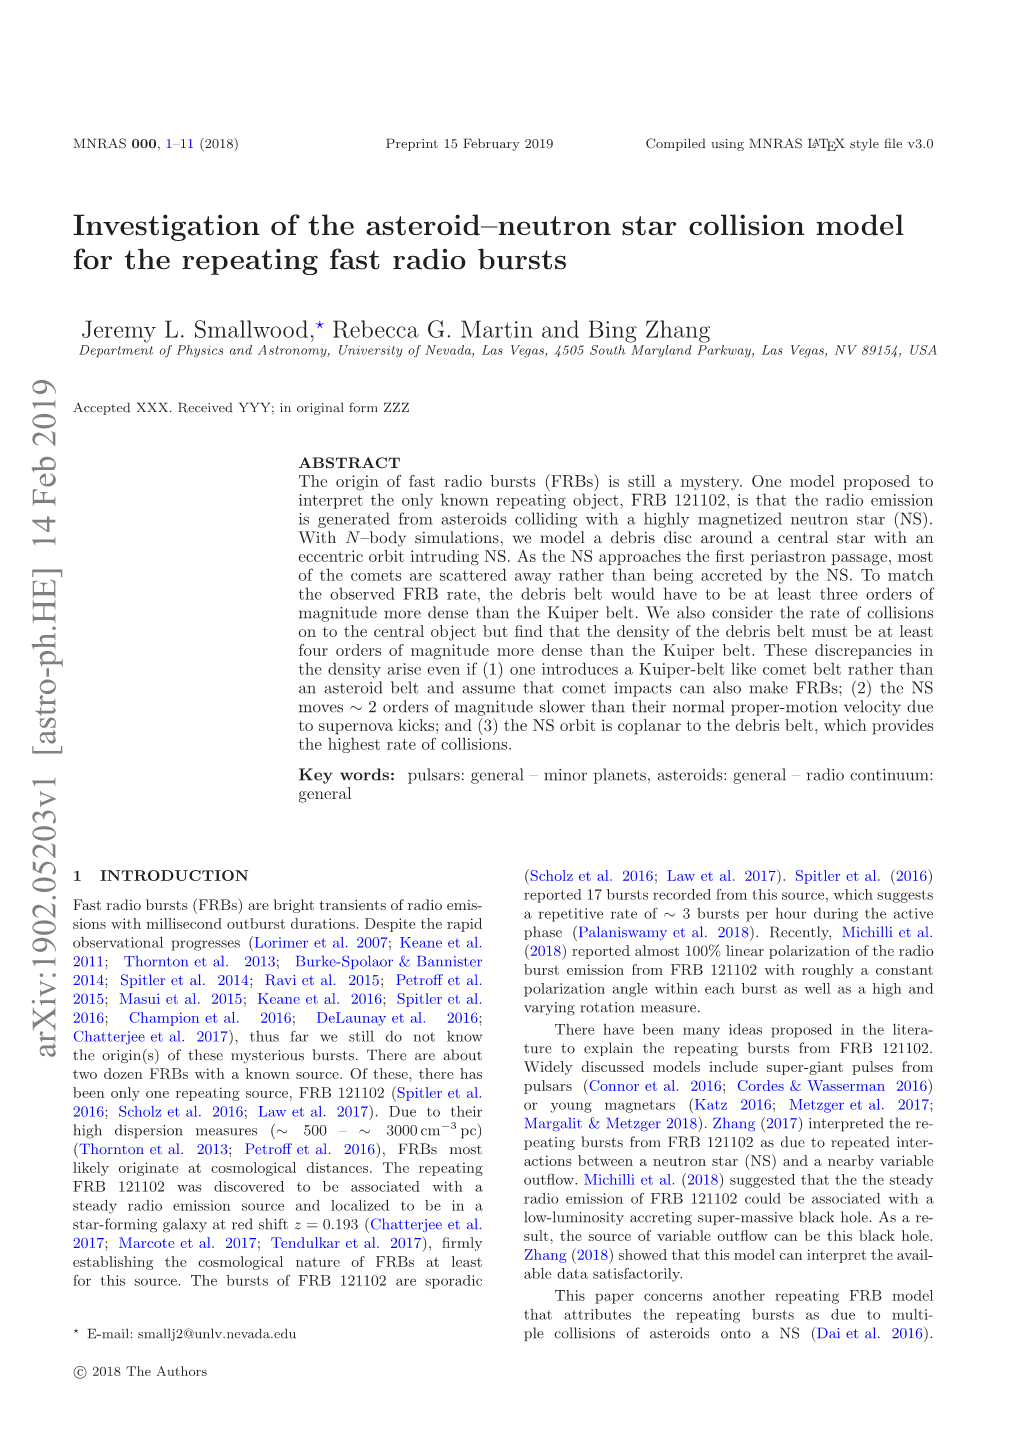 Investigation of the Asteroid–Neutron Star Collision Model for The